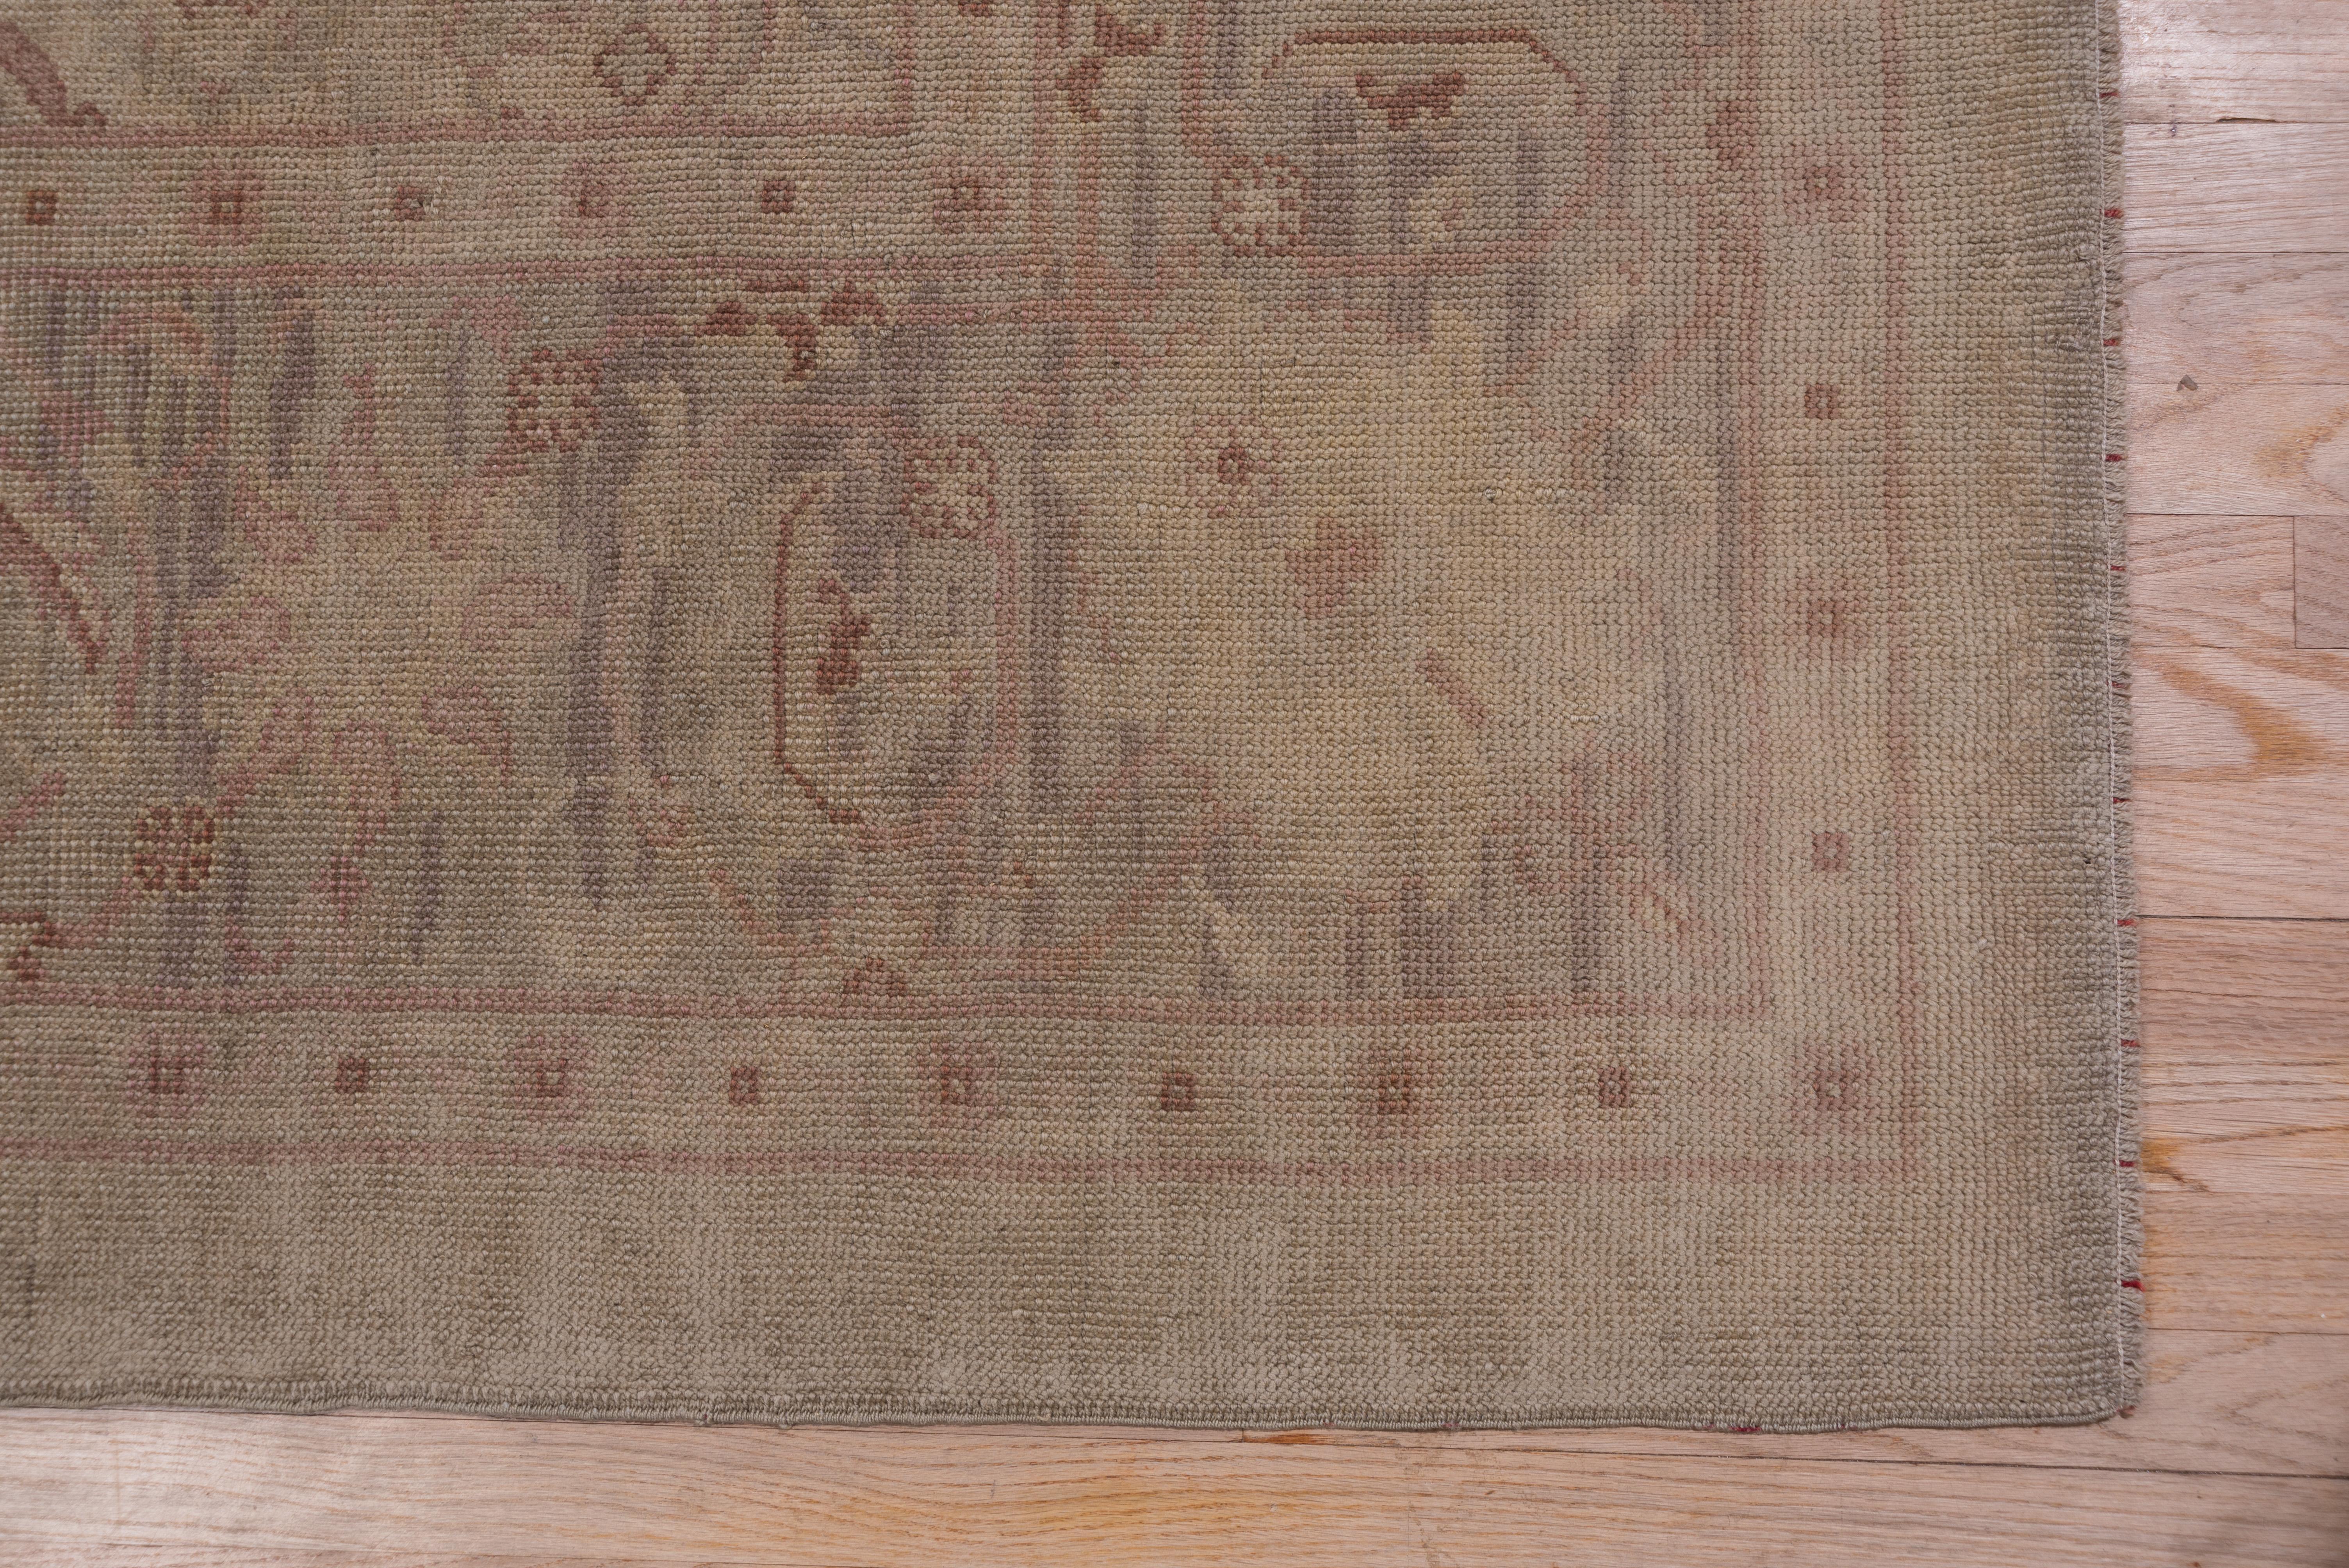 Antique Turkish Oushak Rug, Light Purple Borders, Straw Field, Rust Accents In Good Condition For Sale In New York, NY